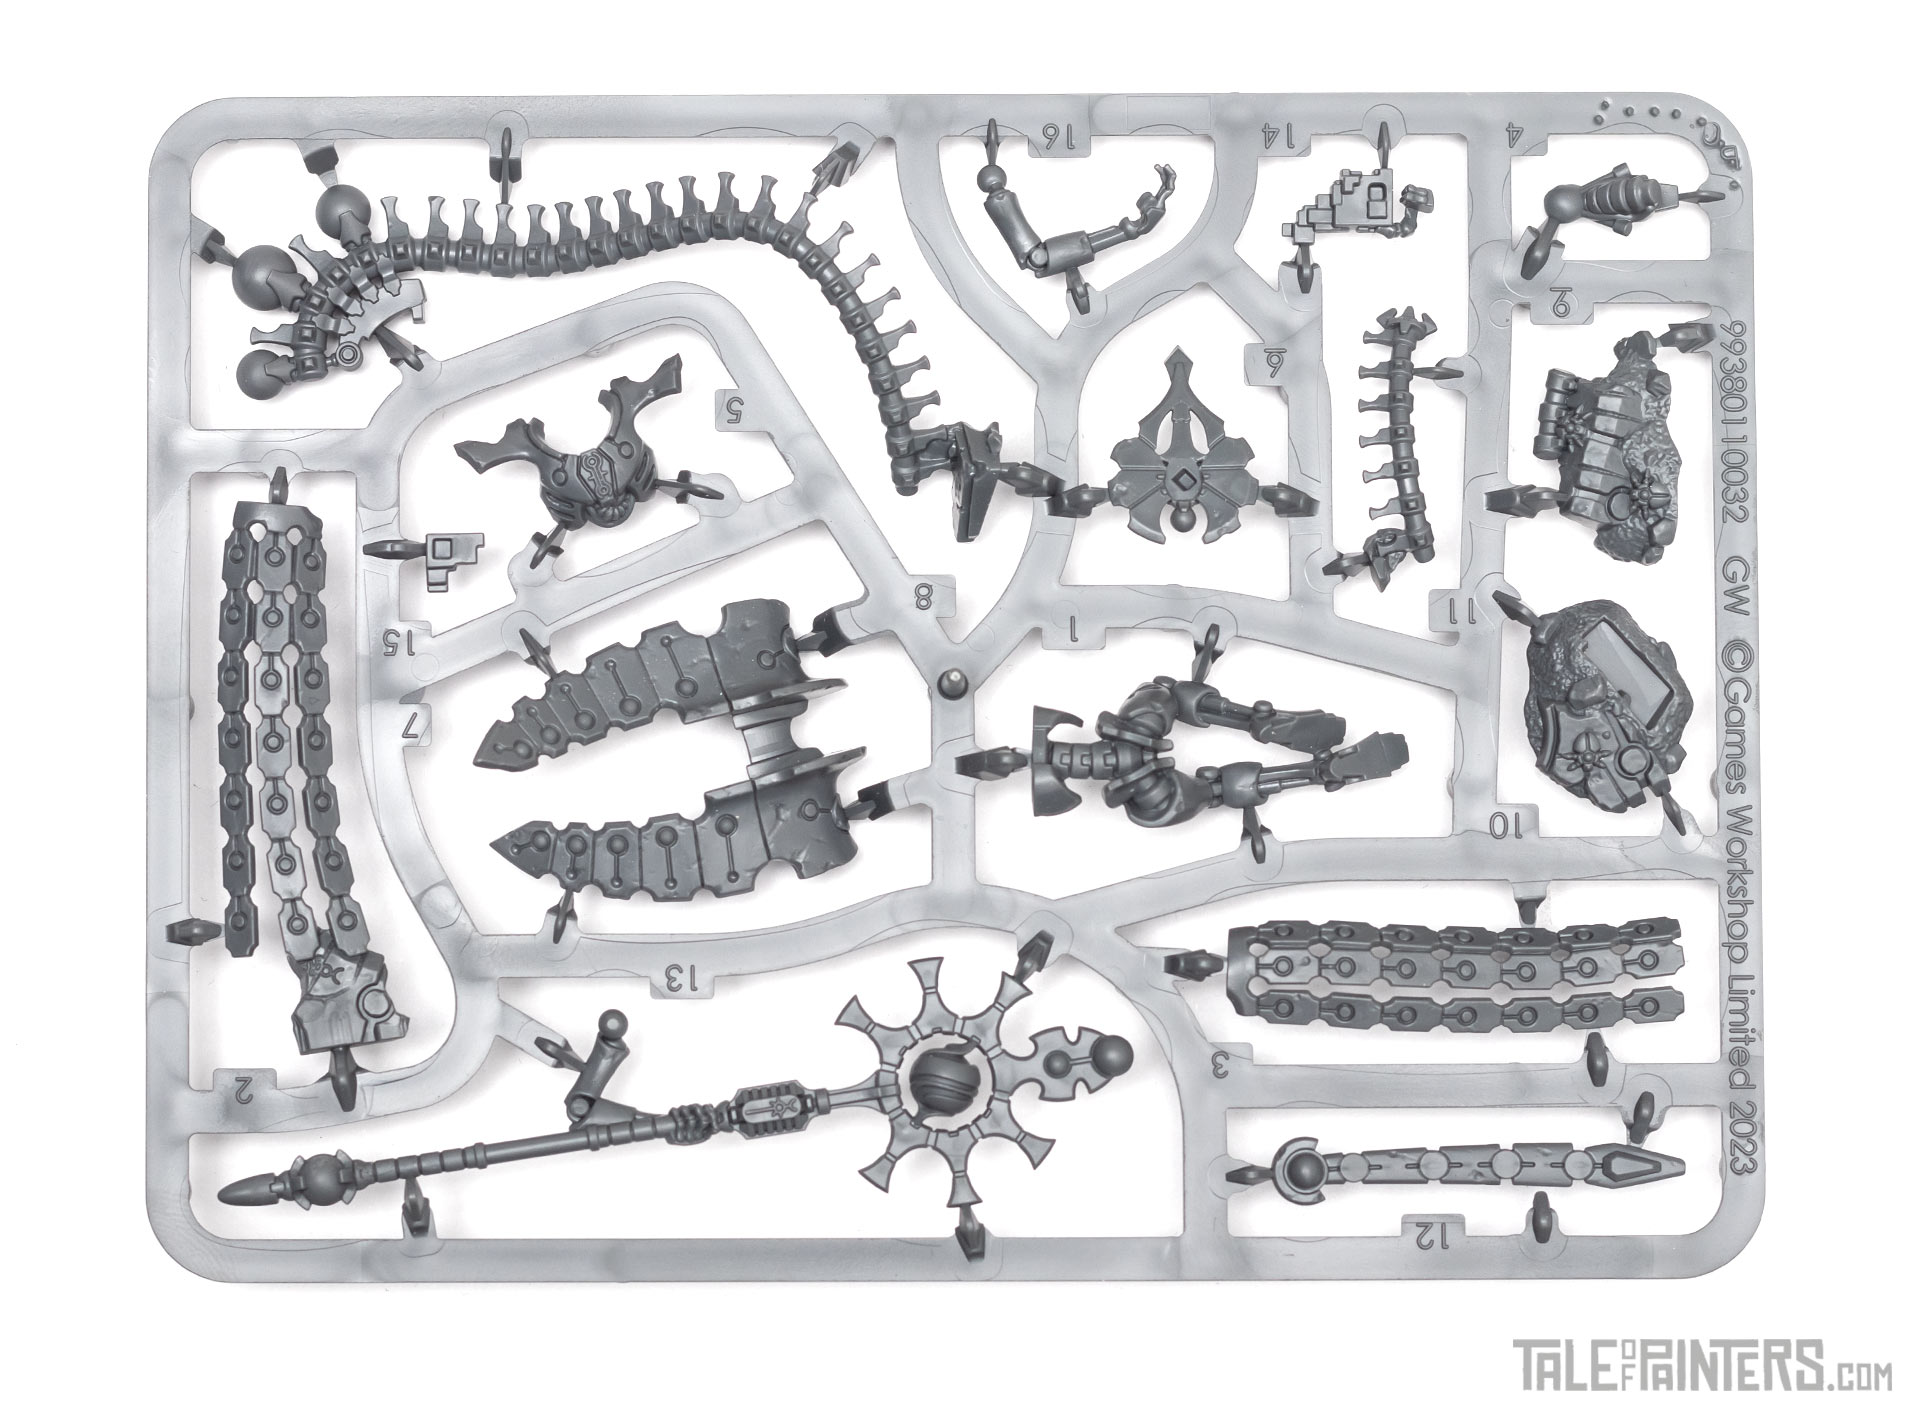 Necrons Orikan the Diviner sprue review